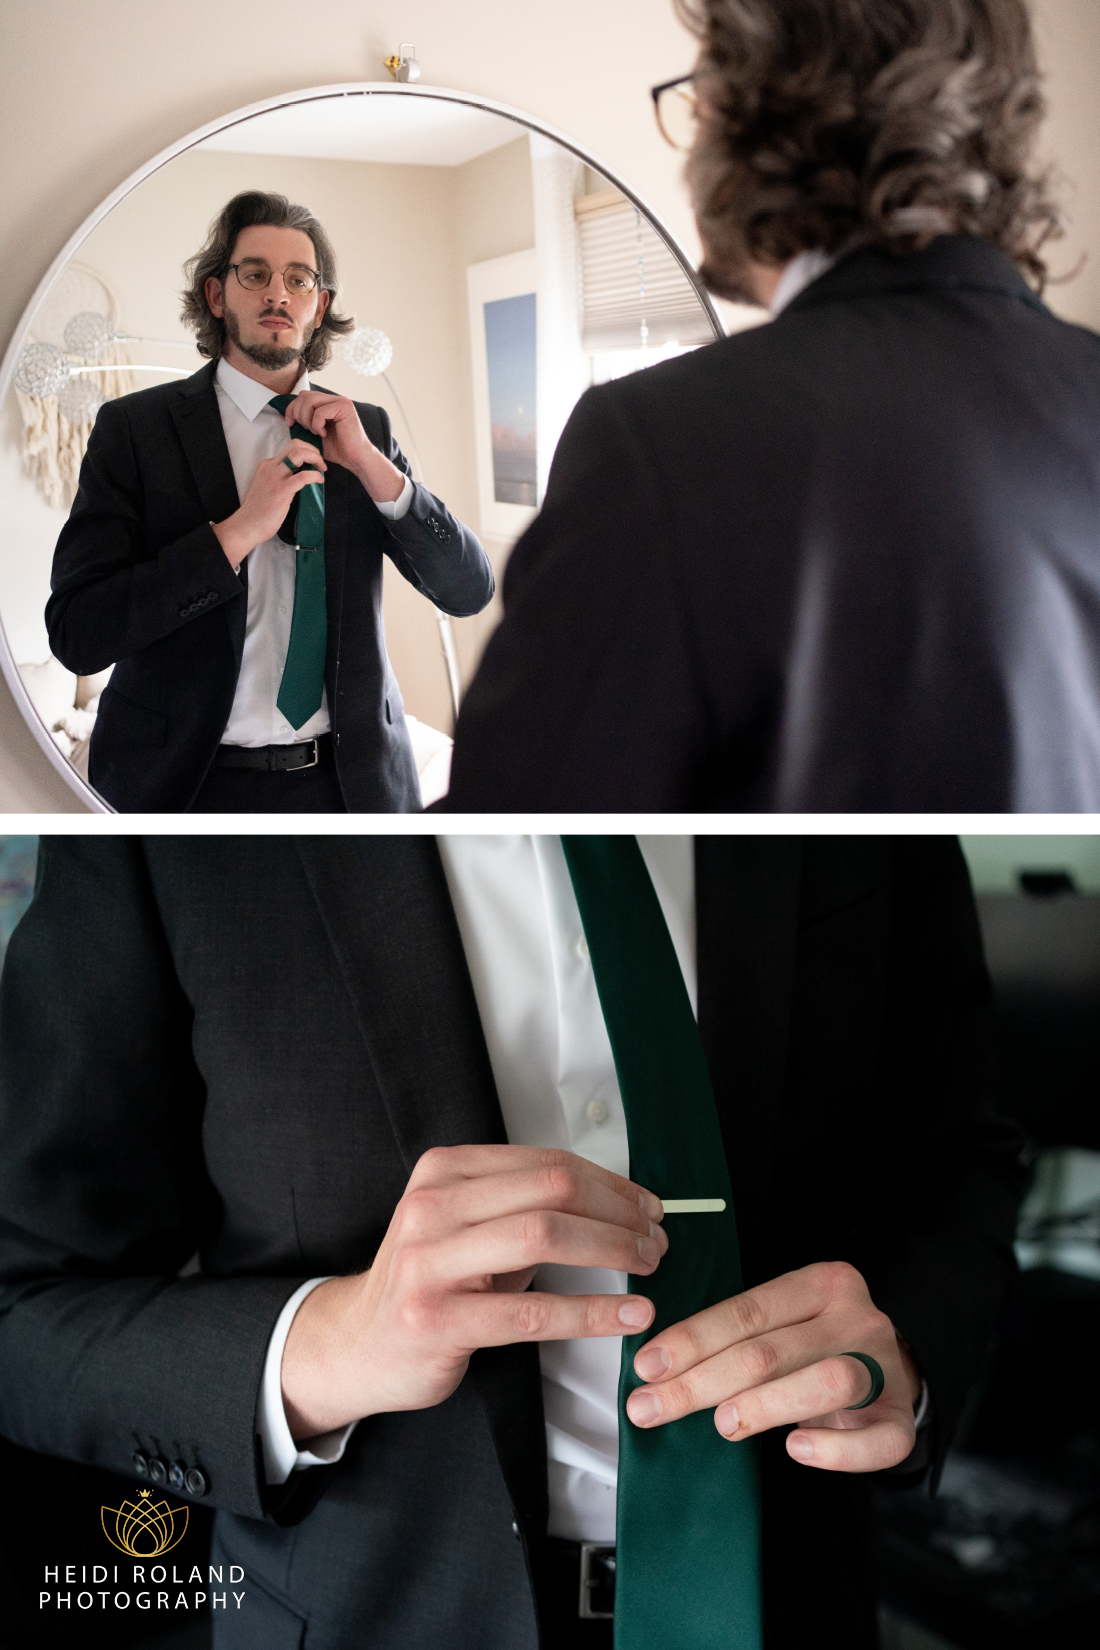 getting ready photos of groom with emerald green tie looking in mirror